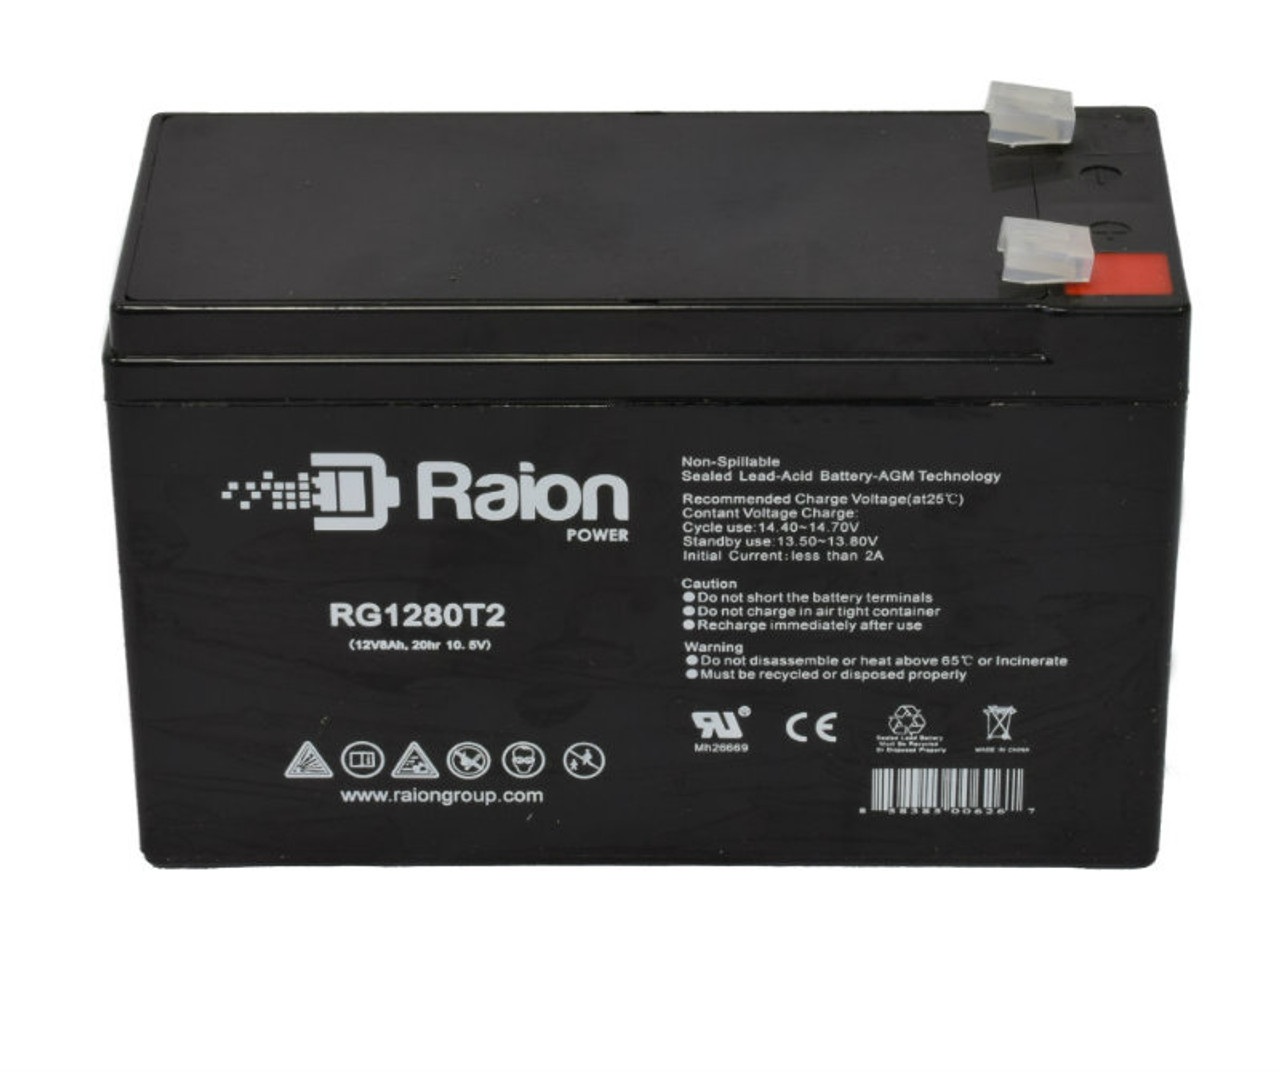 Raion Power Replacement 12V 8Ah Battery for Gould Sp1405 Physiological Monitor - 1 Pack